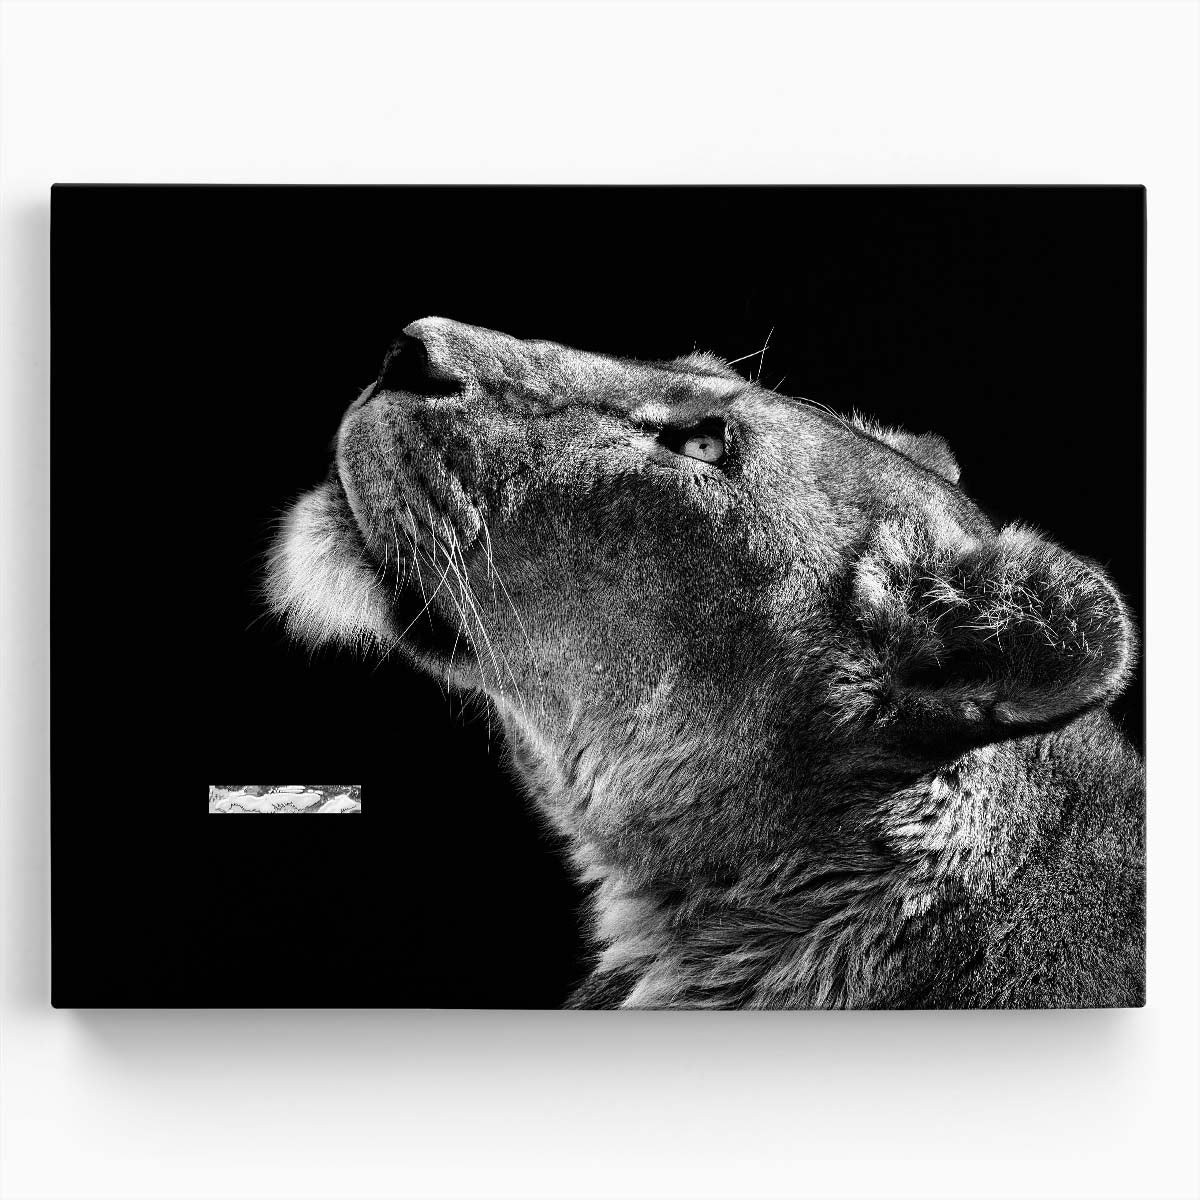 Lioness Profile in Monochrome Dark, Black and White Photography Wall Art by Luxuriance Designs. Made in USA.